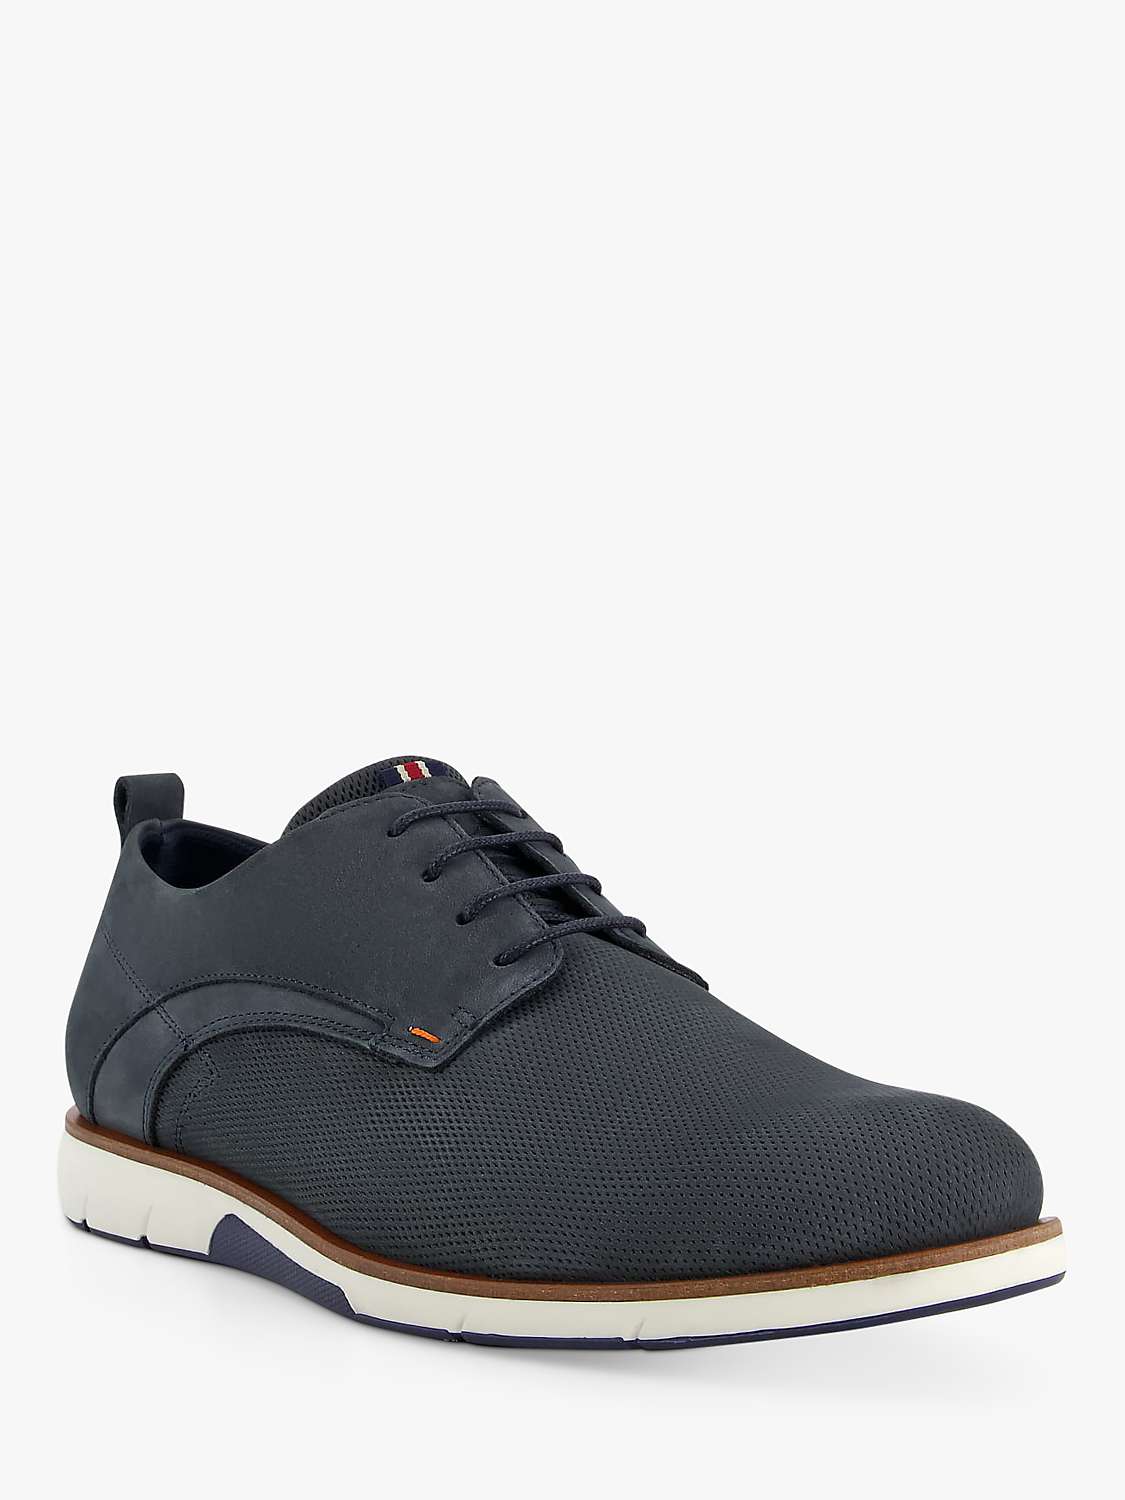 Buy Dune Balad Wide Fit Nubuck Punch Hole Casual Shoes Online at johnlewis.com